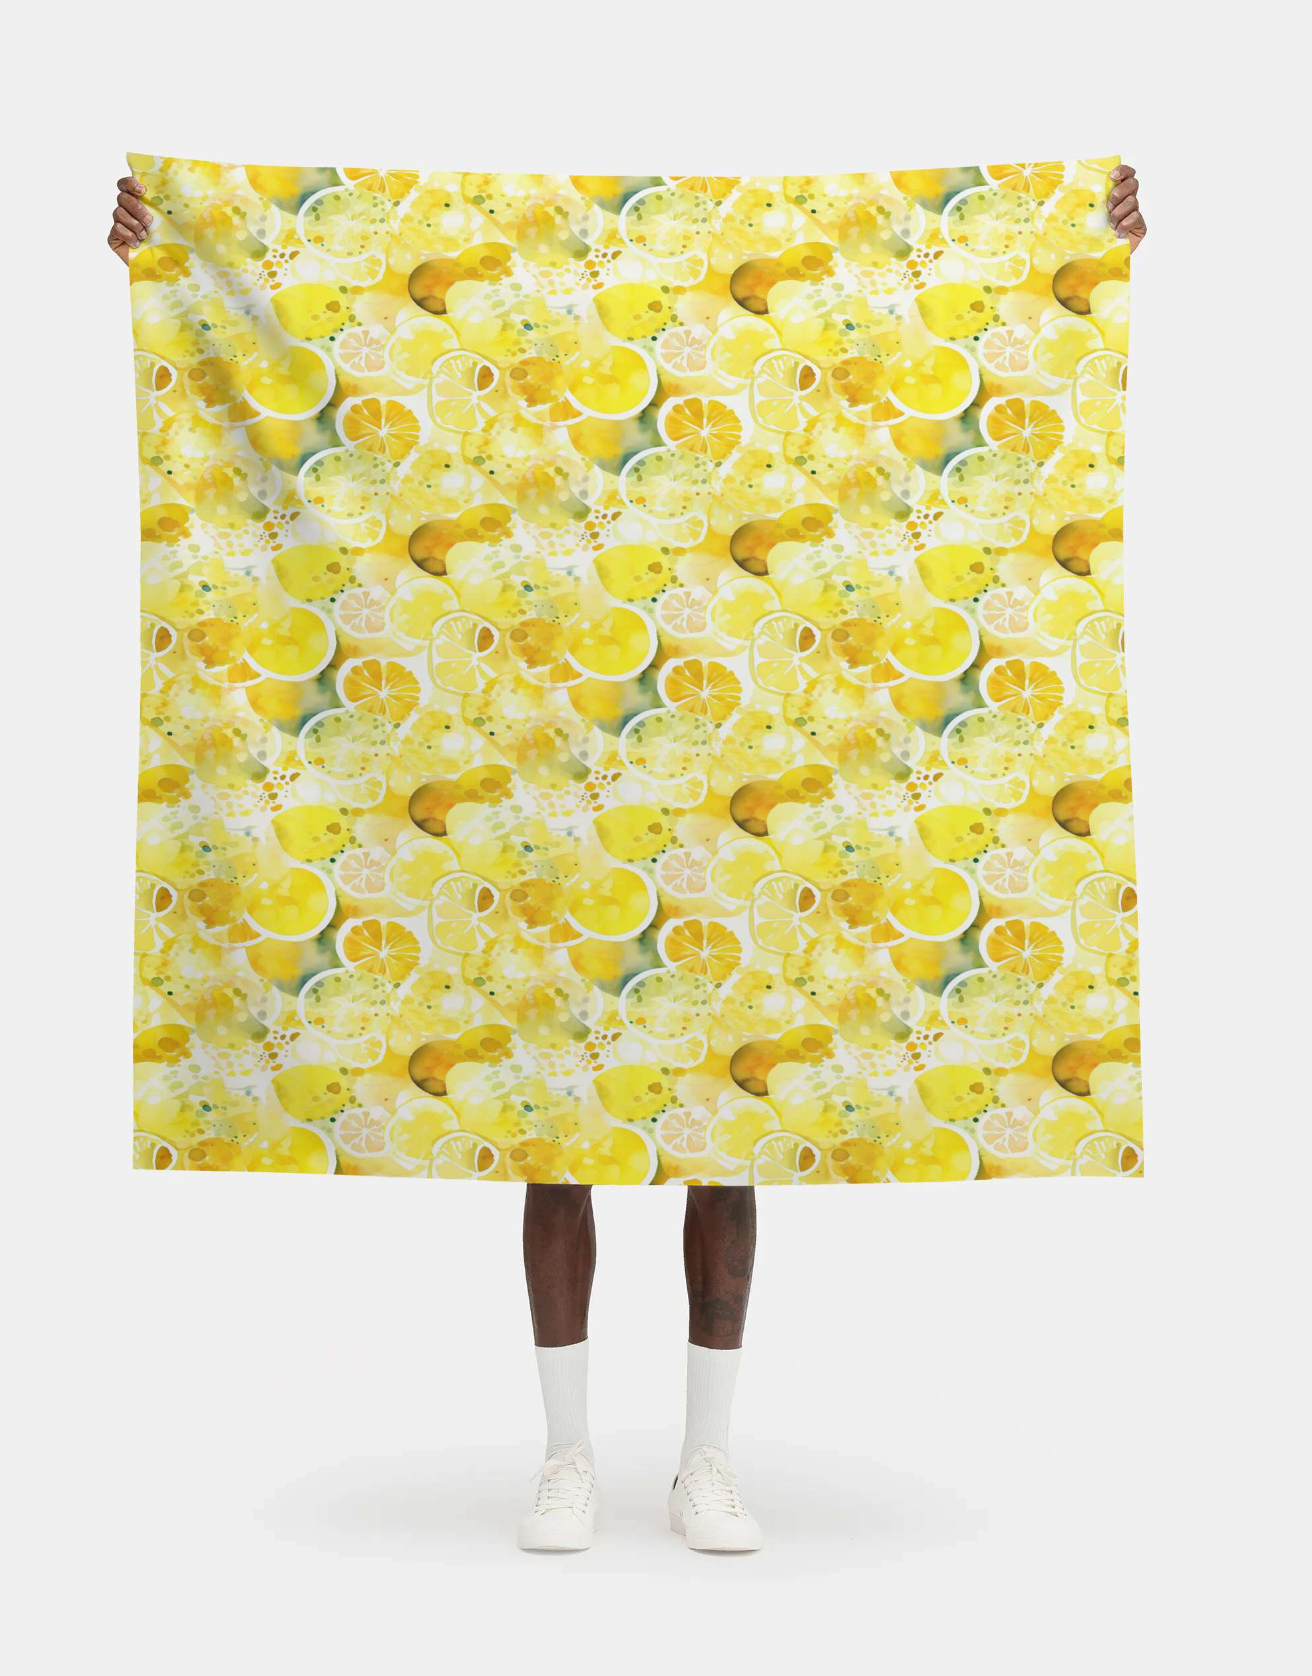 Citron Bliss: Bright Yellow Fabrics and Leather - Friendly & Vibrant Pattern